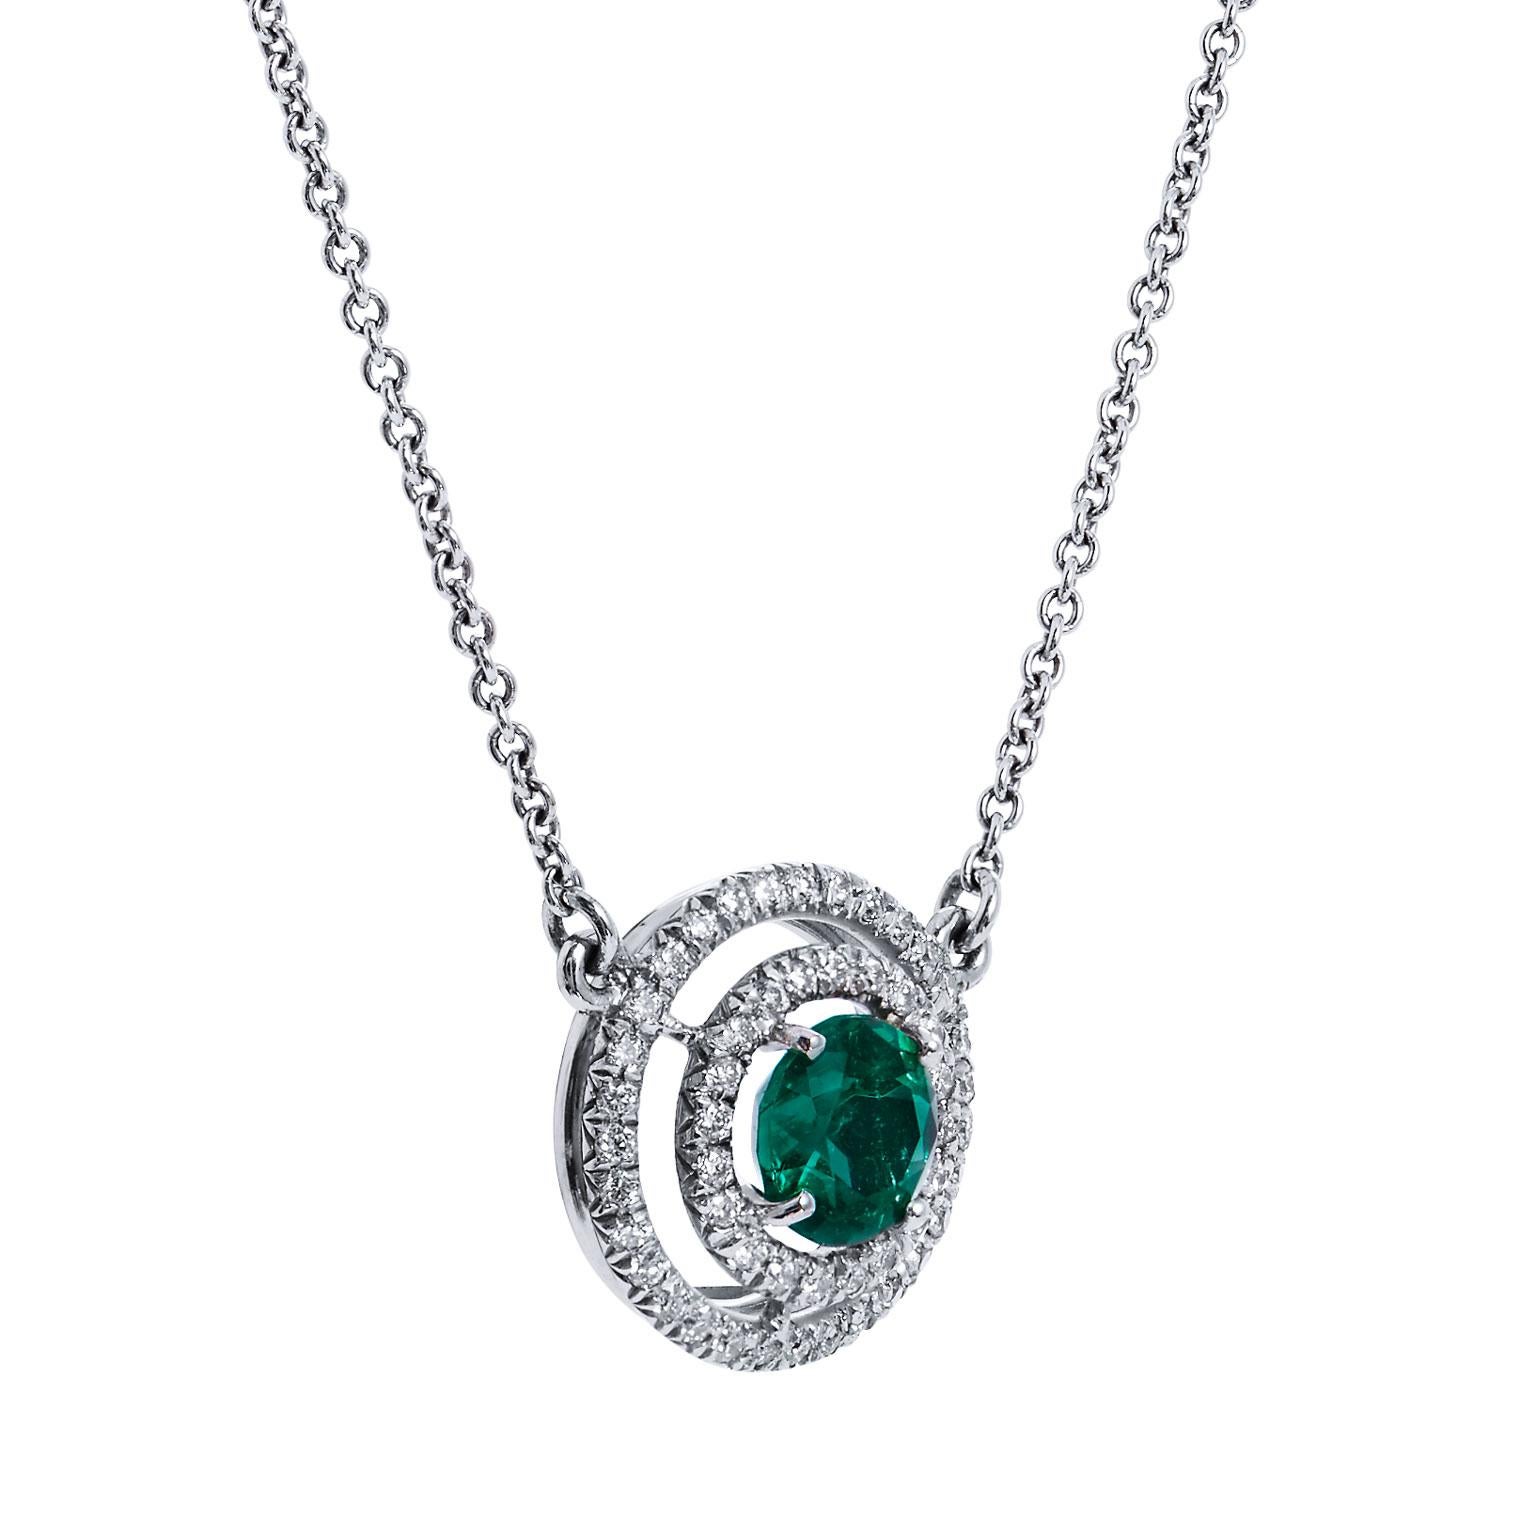 Emerald Diamond Double Halo Pendant Necklace

This stunning emerald and diamond pendant necklace is a one of a kind, handmade, one of a kind creation from H & H Jewels.

This necklace is handcrafted from 18kt white gold. It holds a .93 carat very